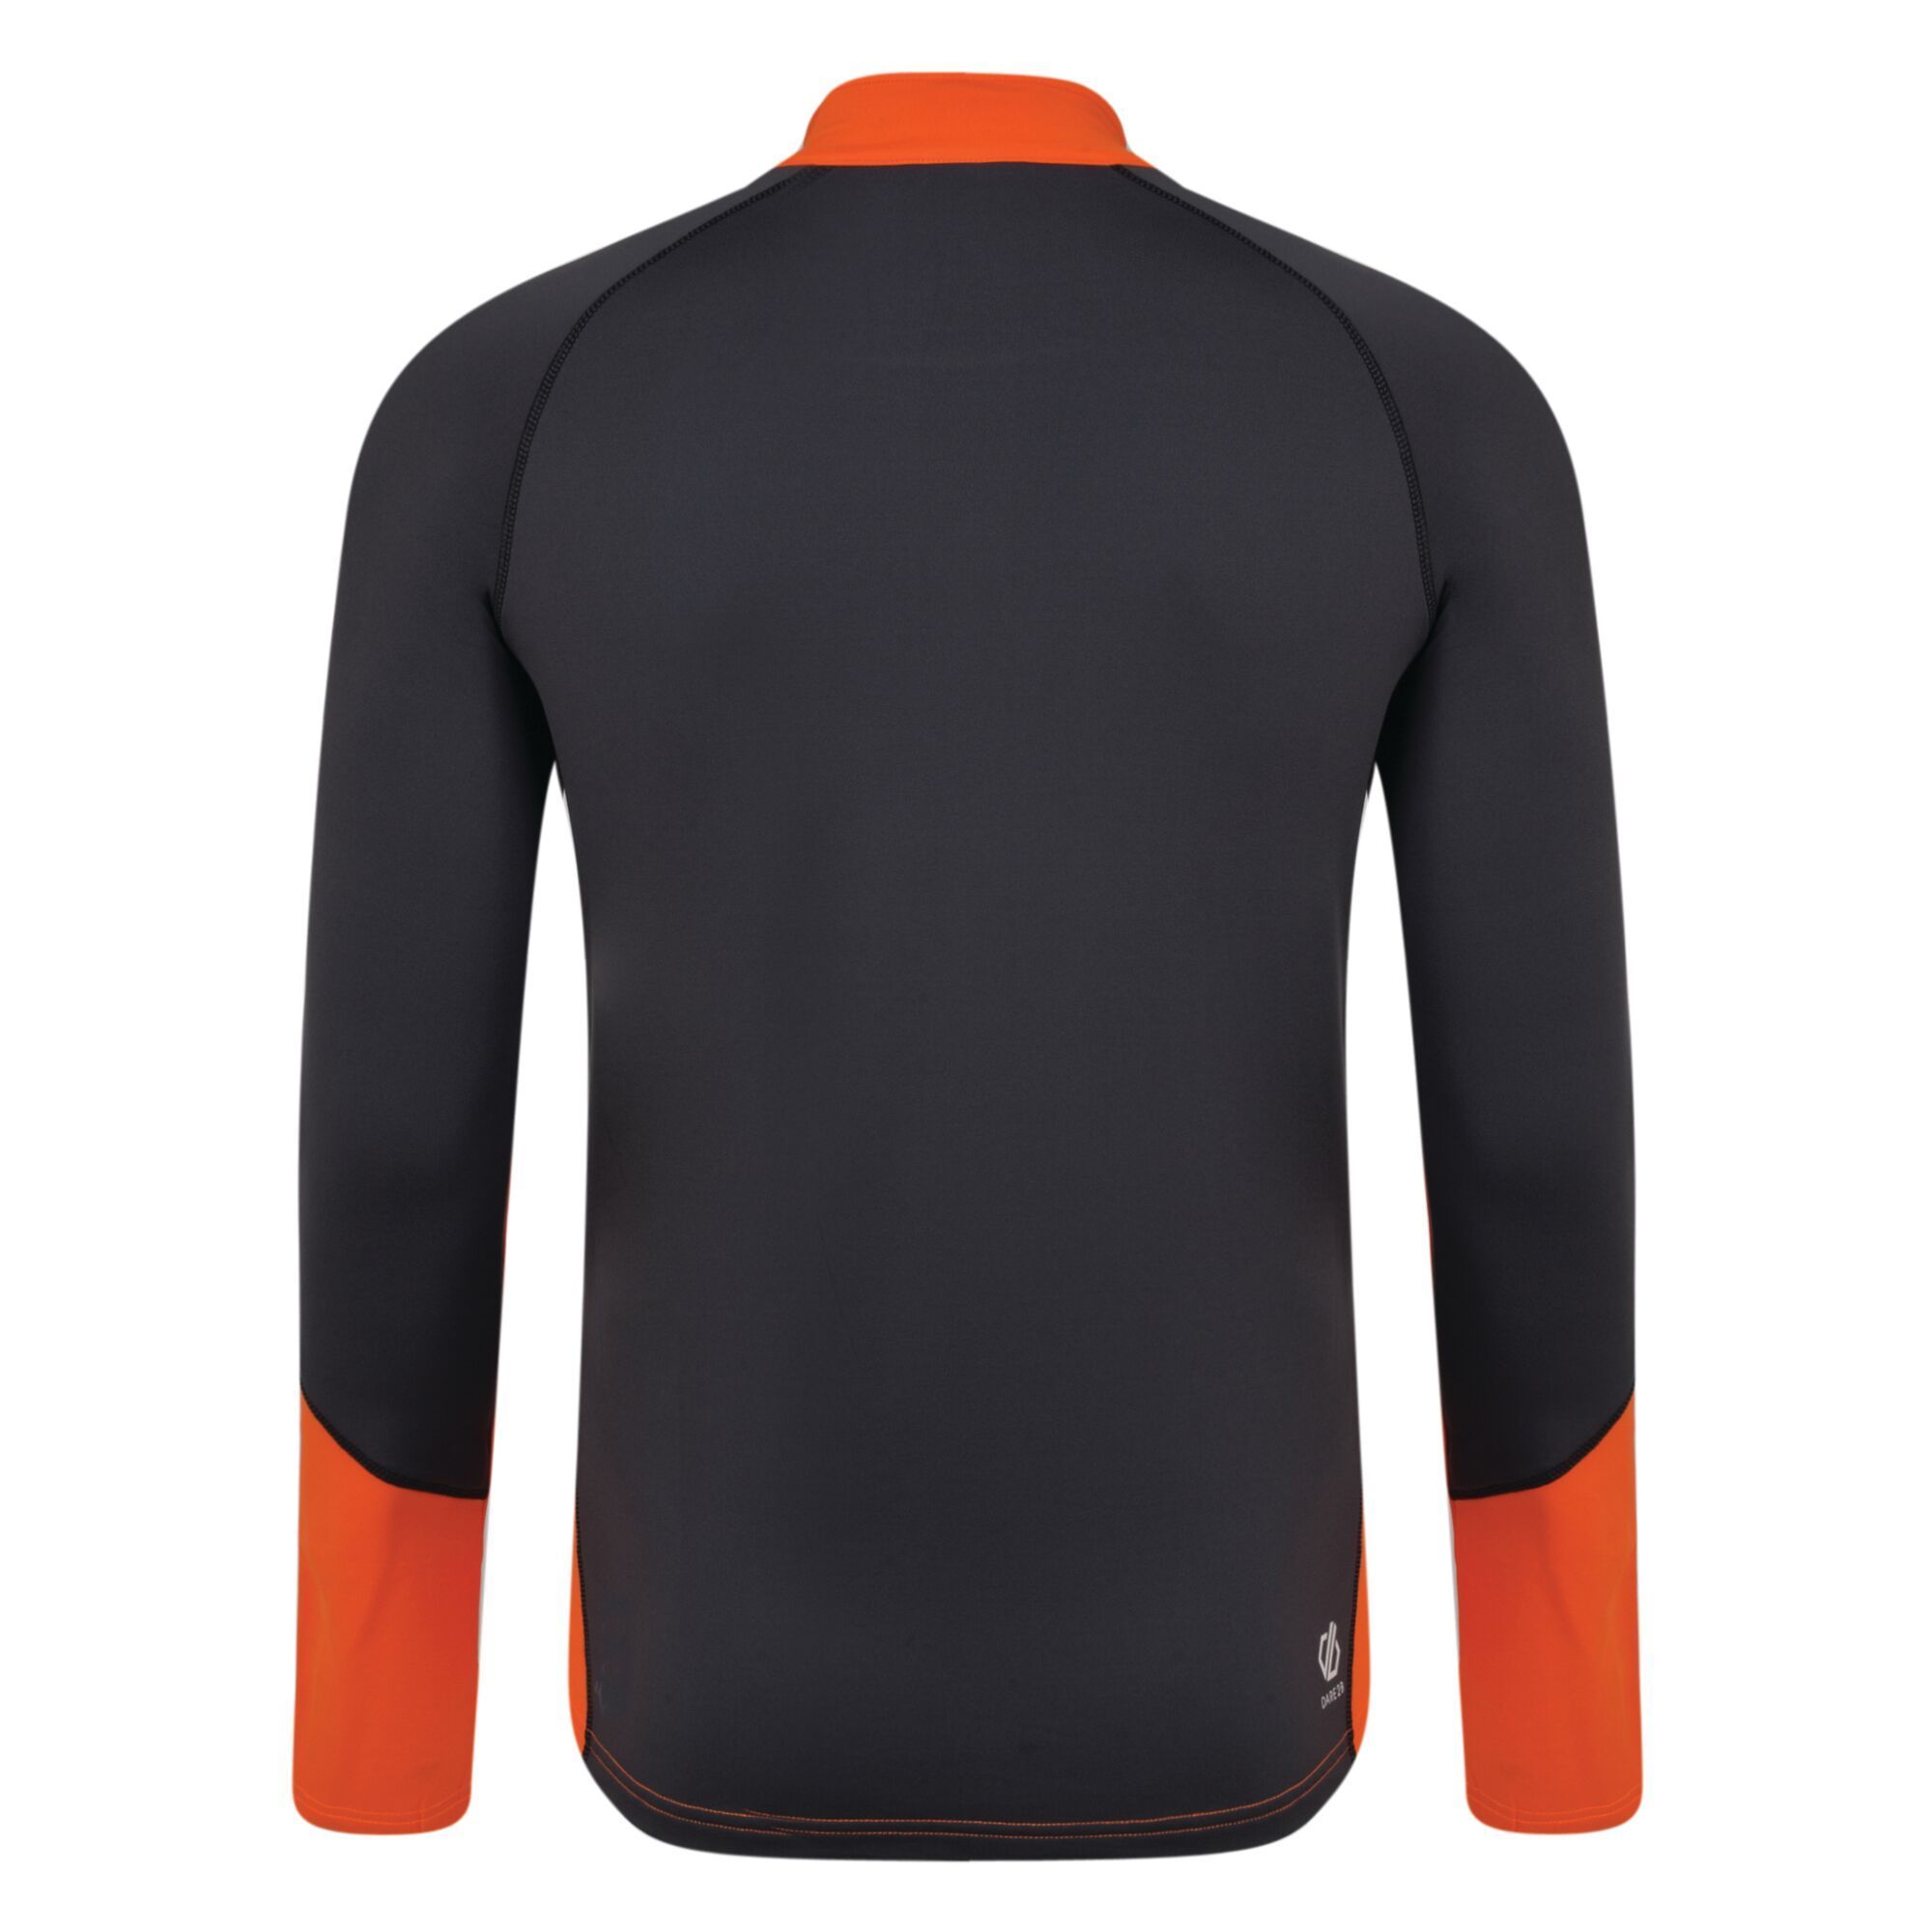 Elastane 3% & polyester 97%. Lightweight Ilus Core warm backed knitted stretch fabric. Quick drying. Half length zip with inner zip and chin guard.